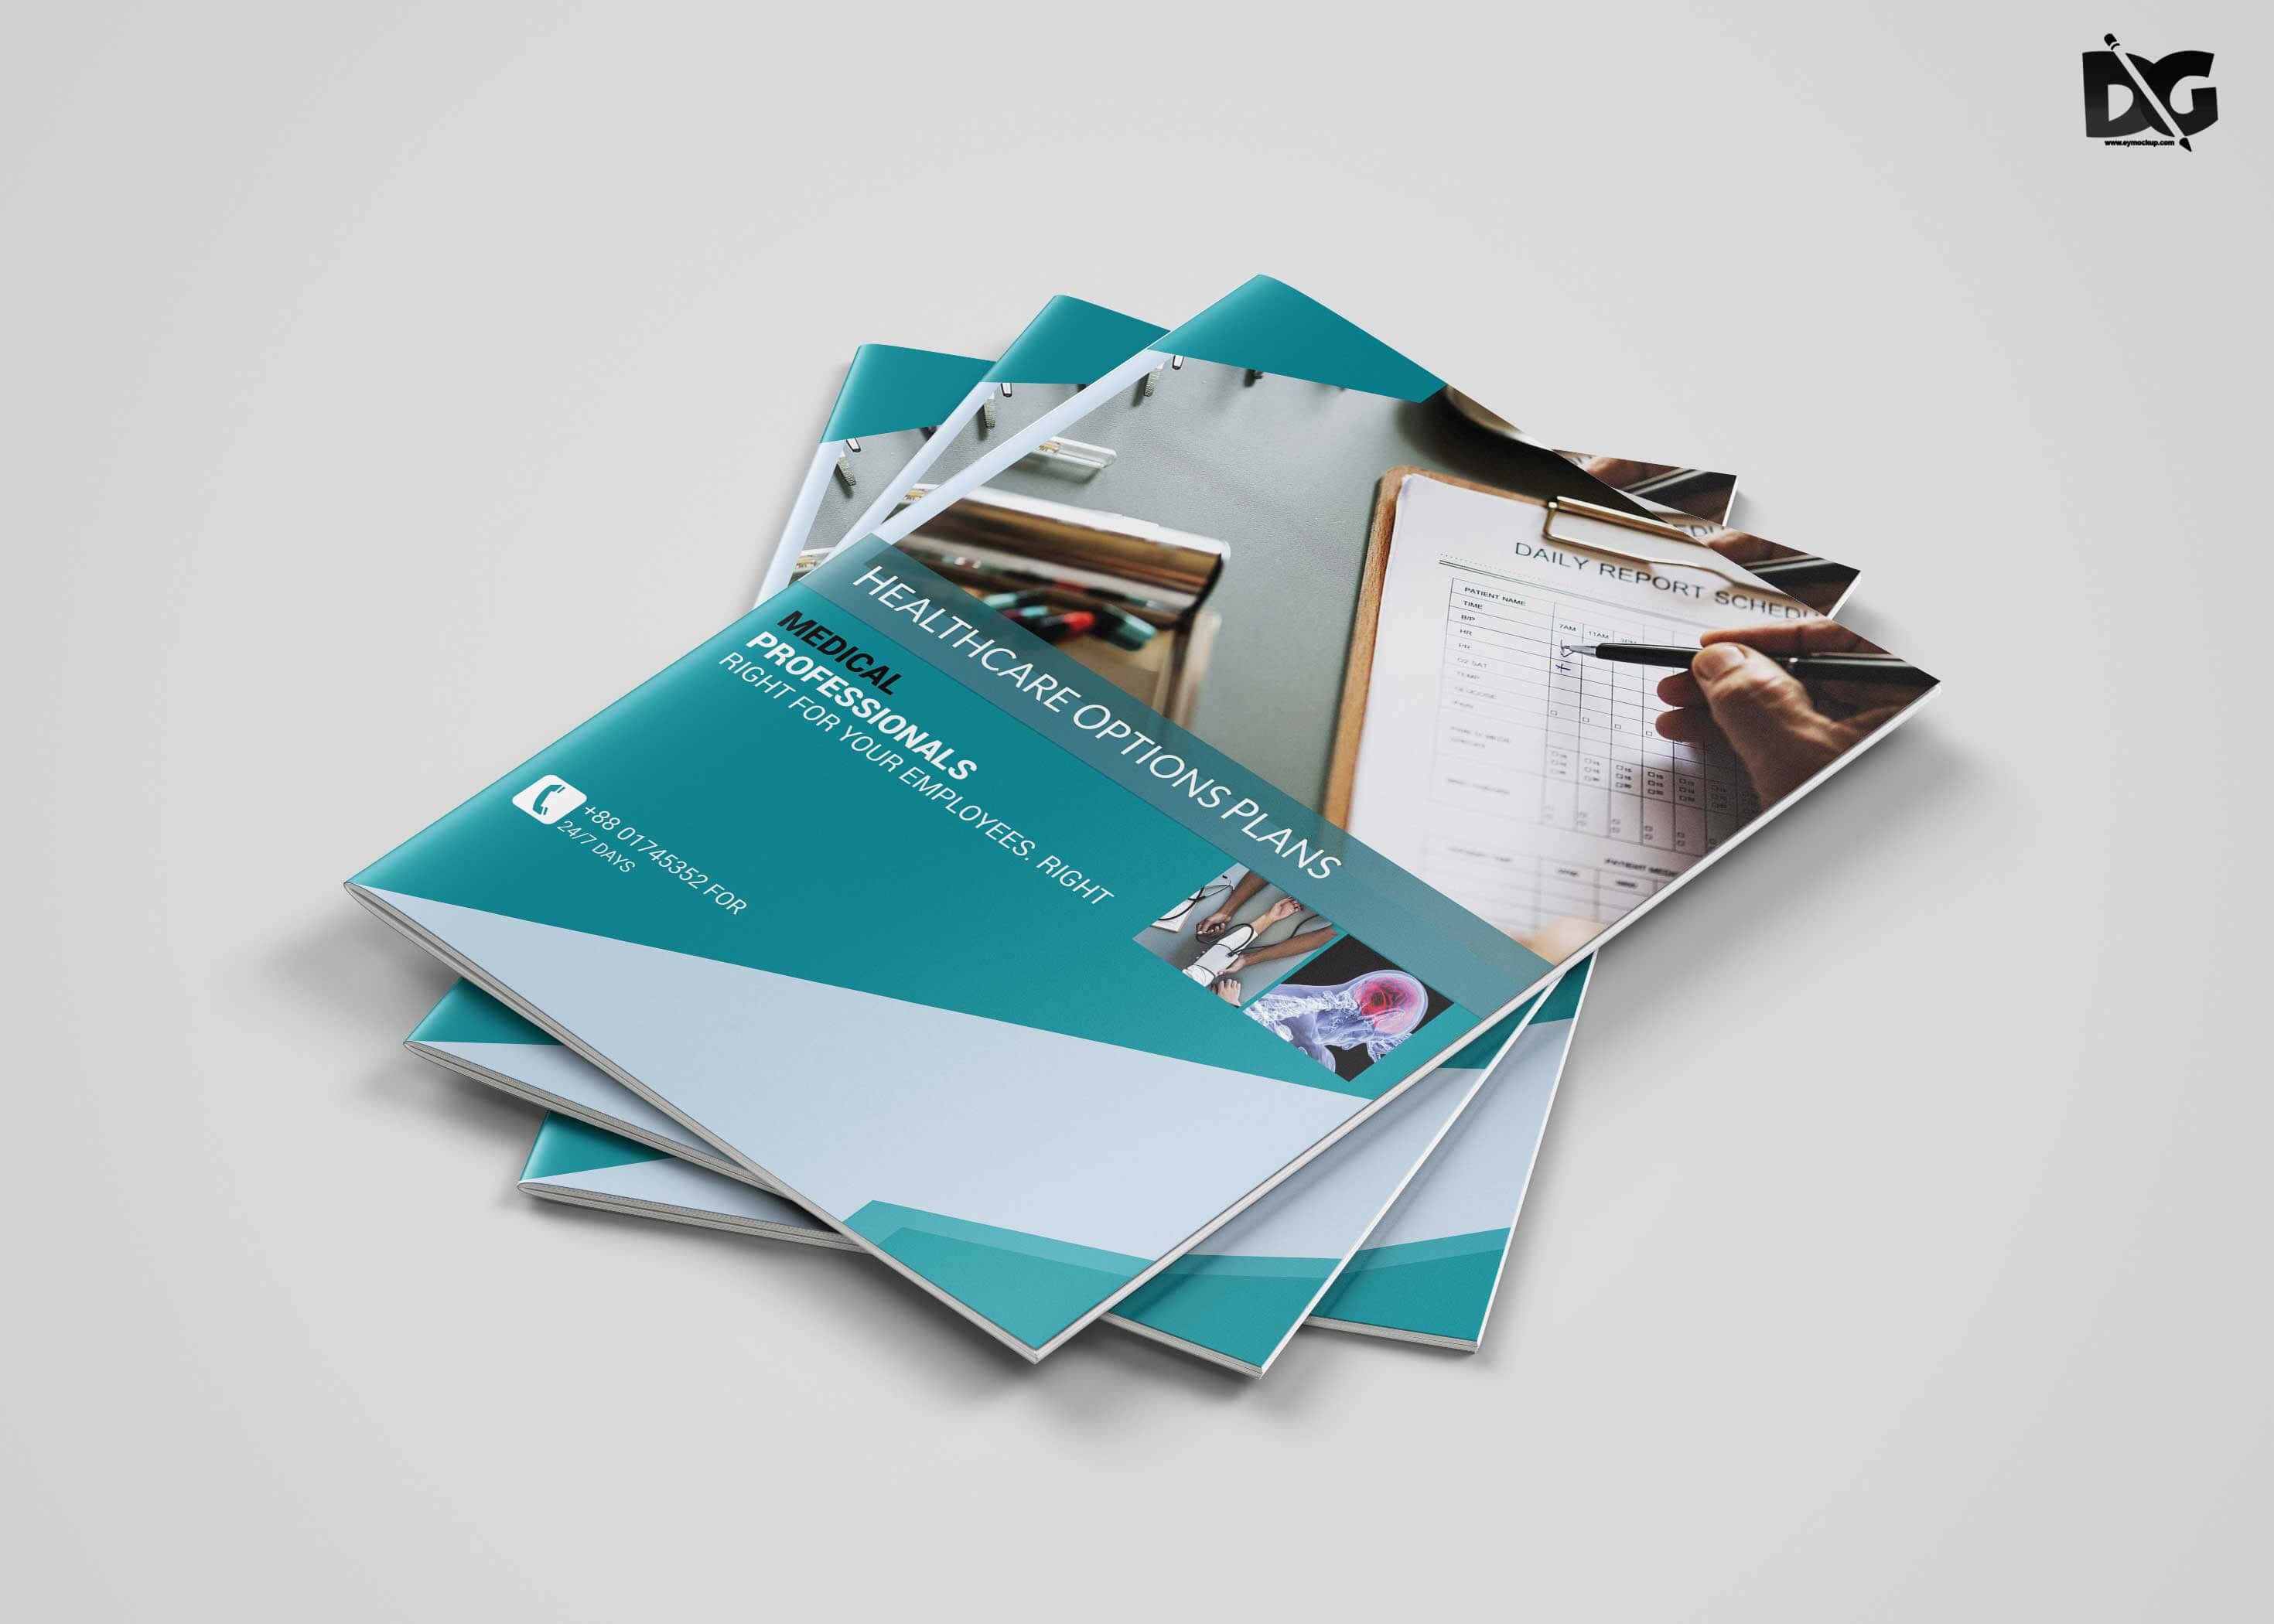 Free Download Health Care A4 Brochure Template | Free Psd Mockup Throughout Healthcare Brochure Templates Free Download